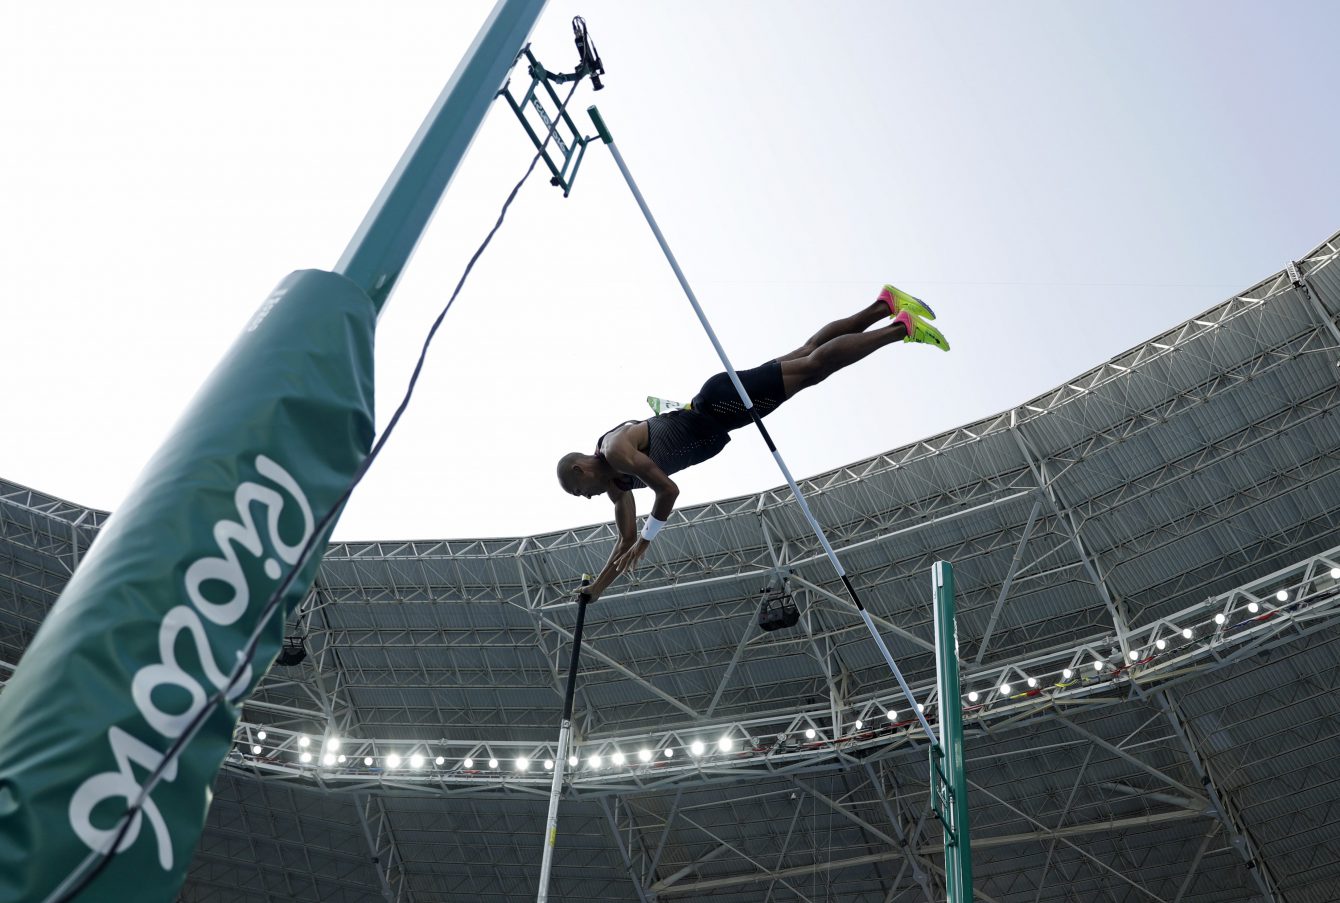 Canada's Damian Warner competes in men's decathlon pole vault during the athletics competitions of the 2016 Summer Olympics at the Olympic stadium in Rio de Janeiro, Brazil, Thursday, Aug. 18, 2016. (AP Photo/Matt Dunham)